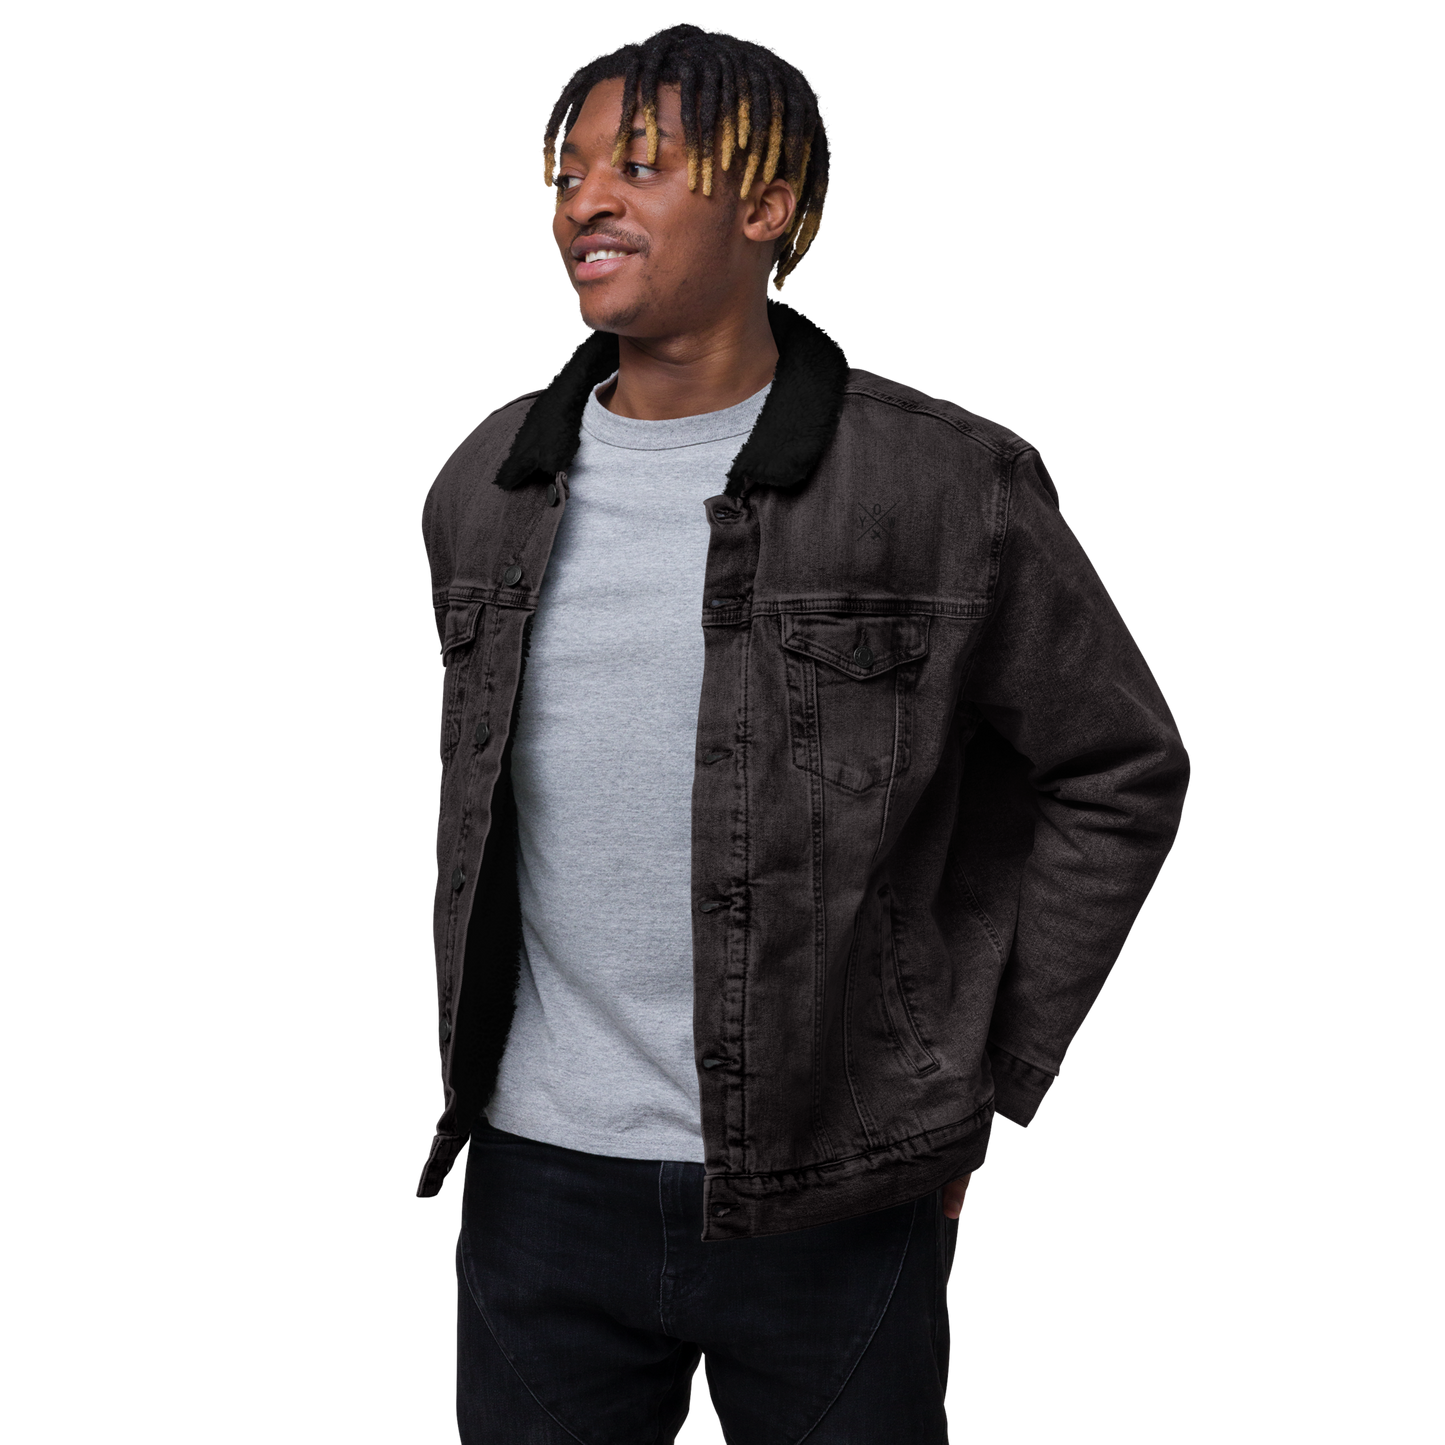 YHM Designs - YOW Ottawa Denim Sherpa Jacket - Crossed-X Design with Airport Code and Vintage Propliner - Black & White Embroidery - Image 08